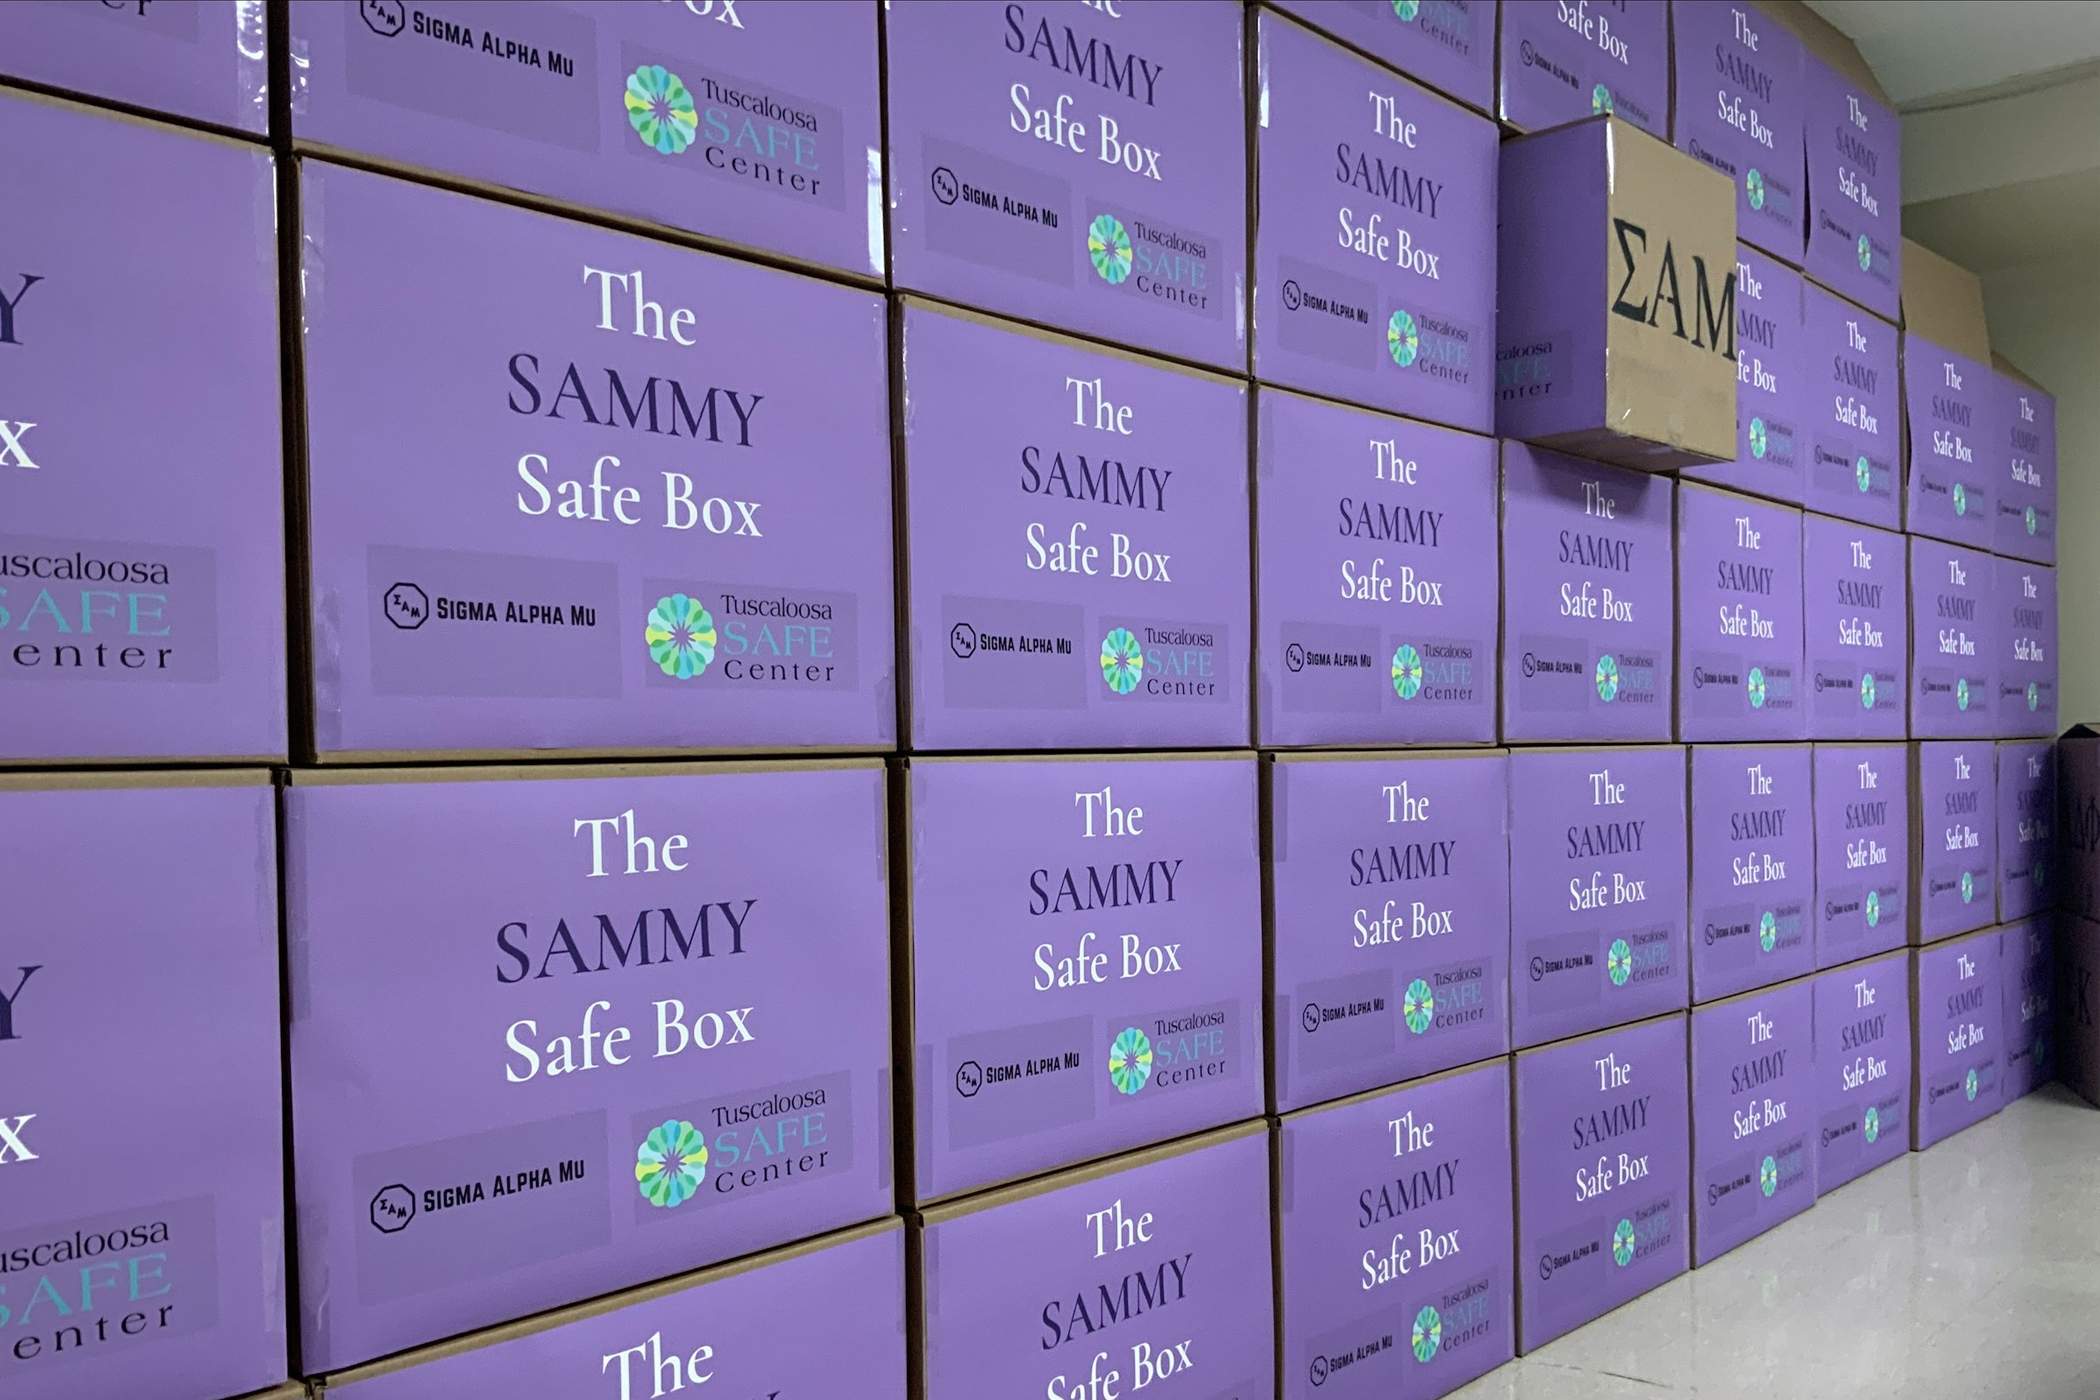 Numerous Sammy Safe Boxes stacked in a room